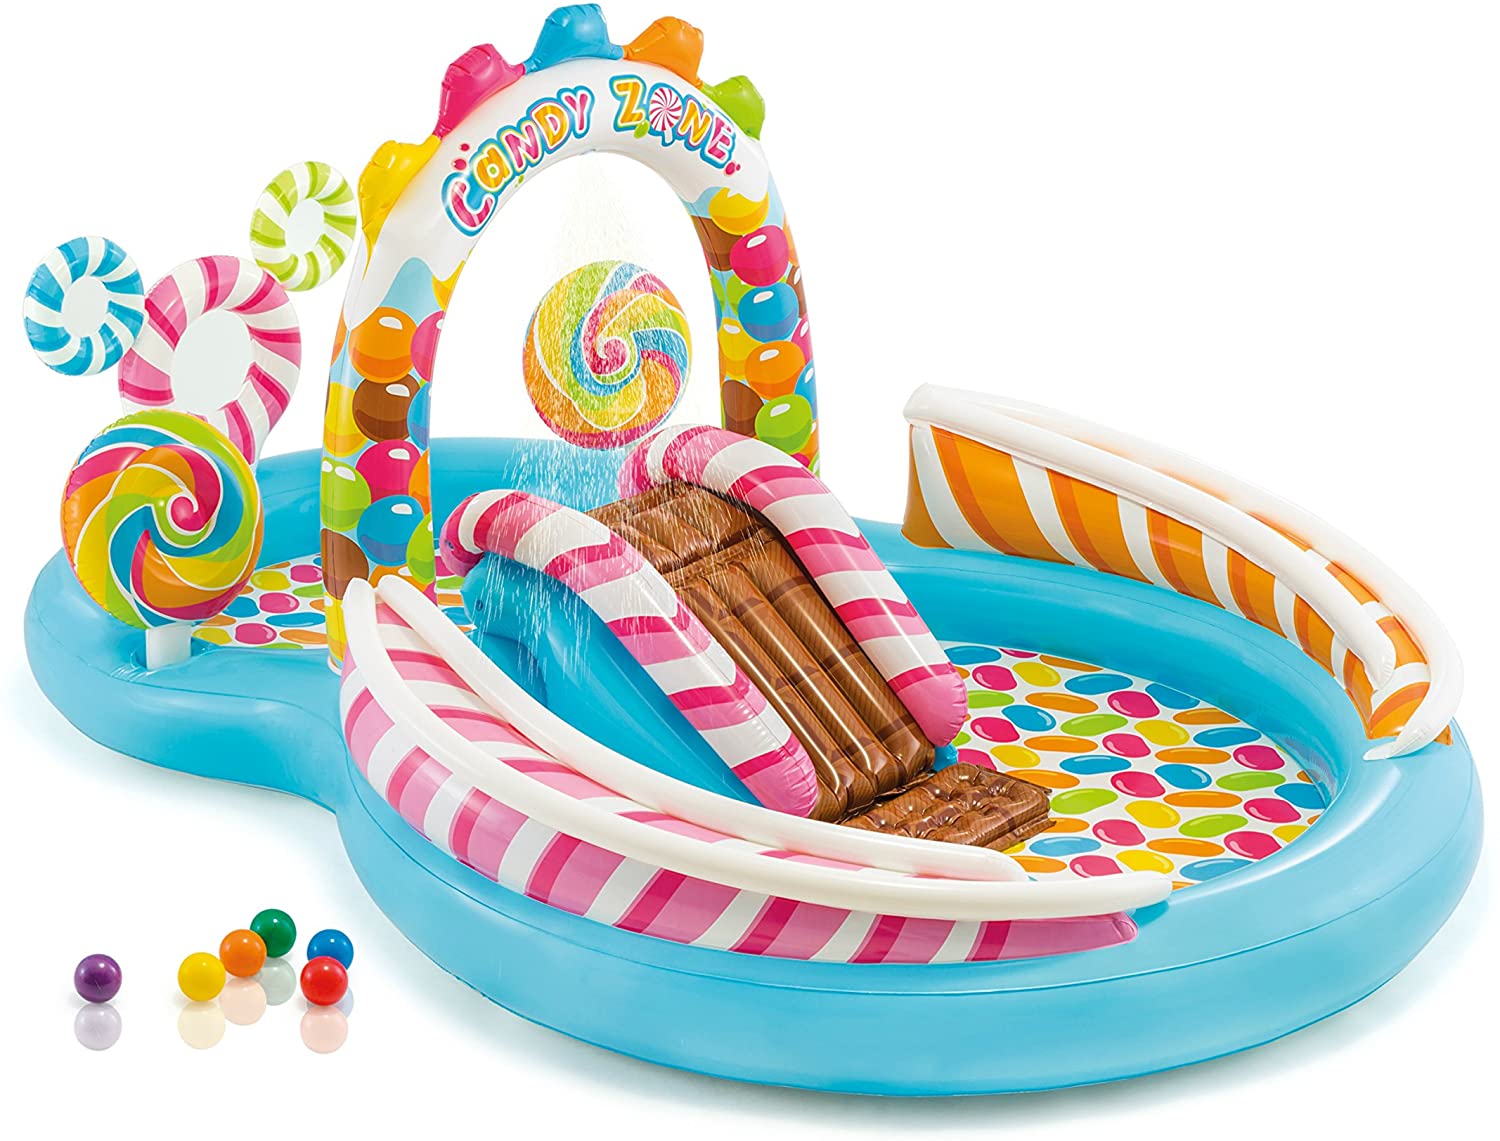 intex candy zone inflatable play center